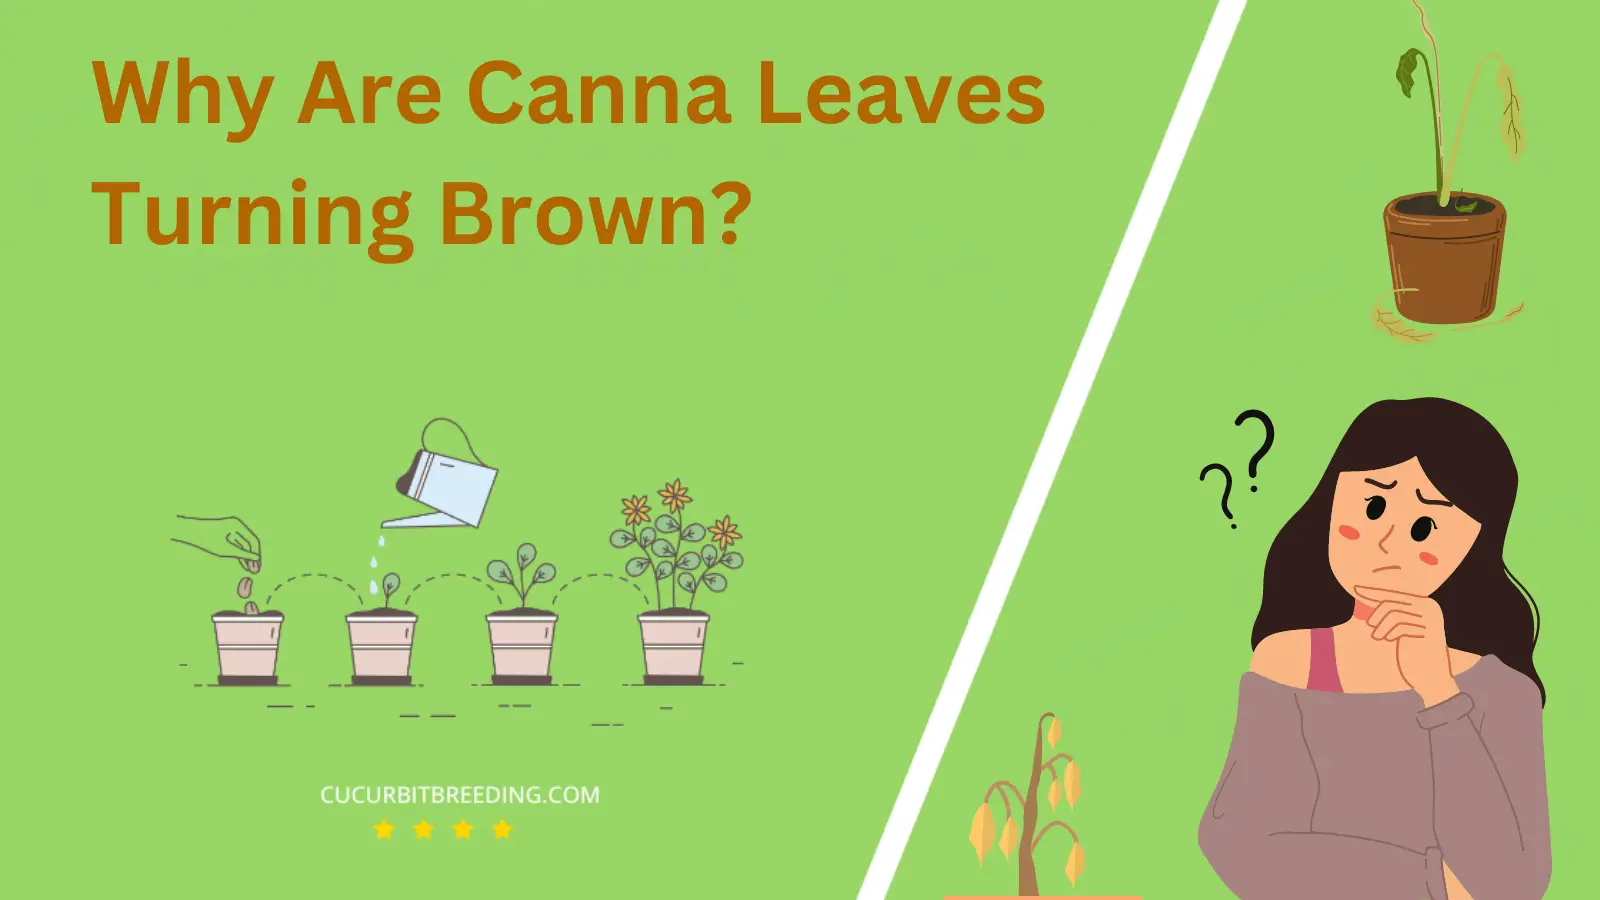 Why Are Canna Leaves Turning Brown